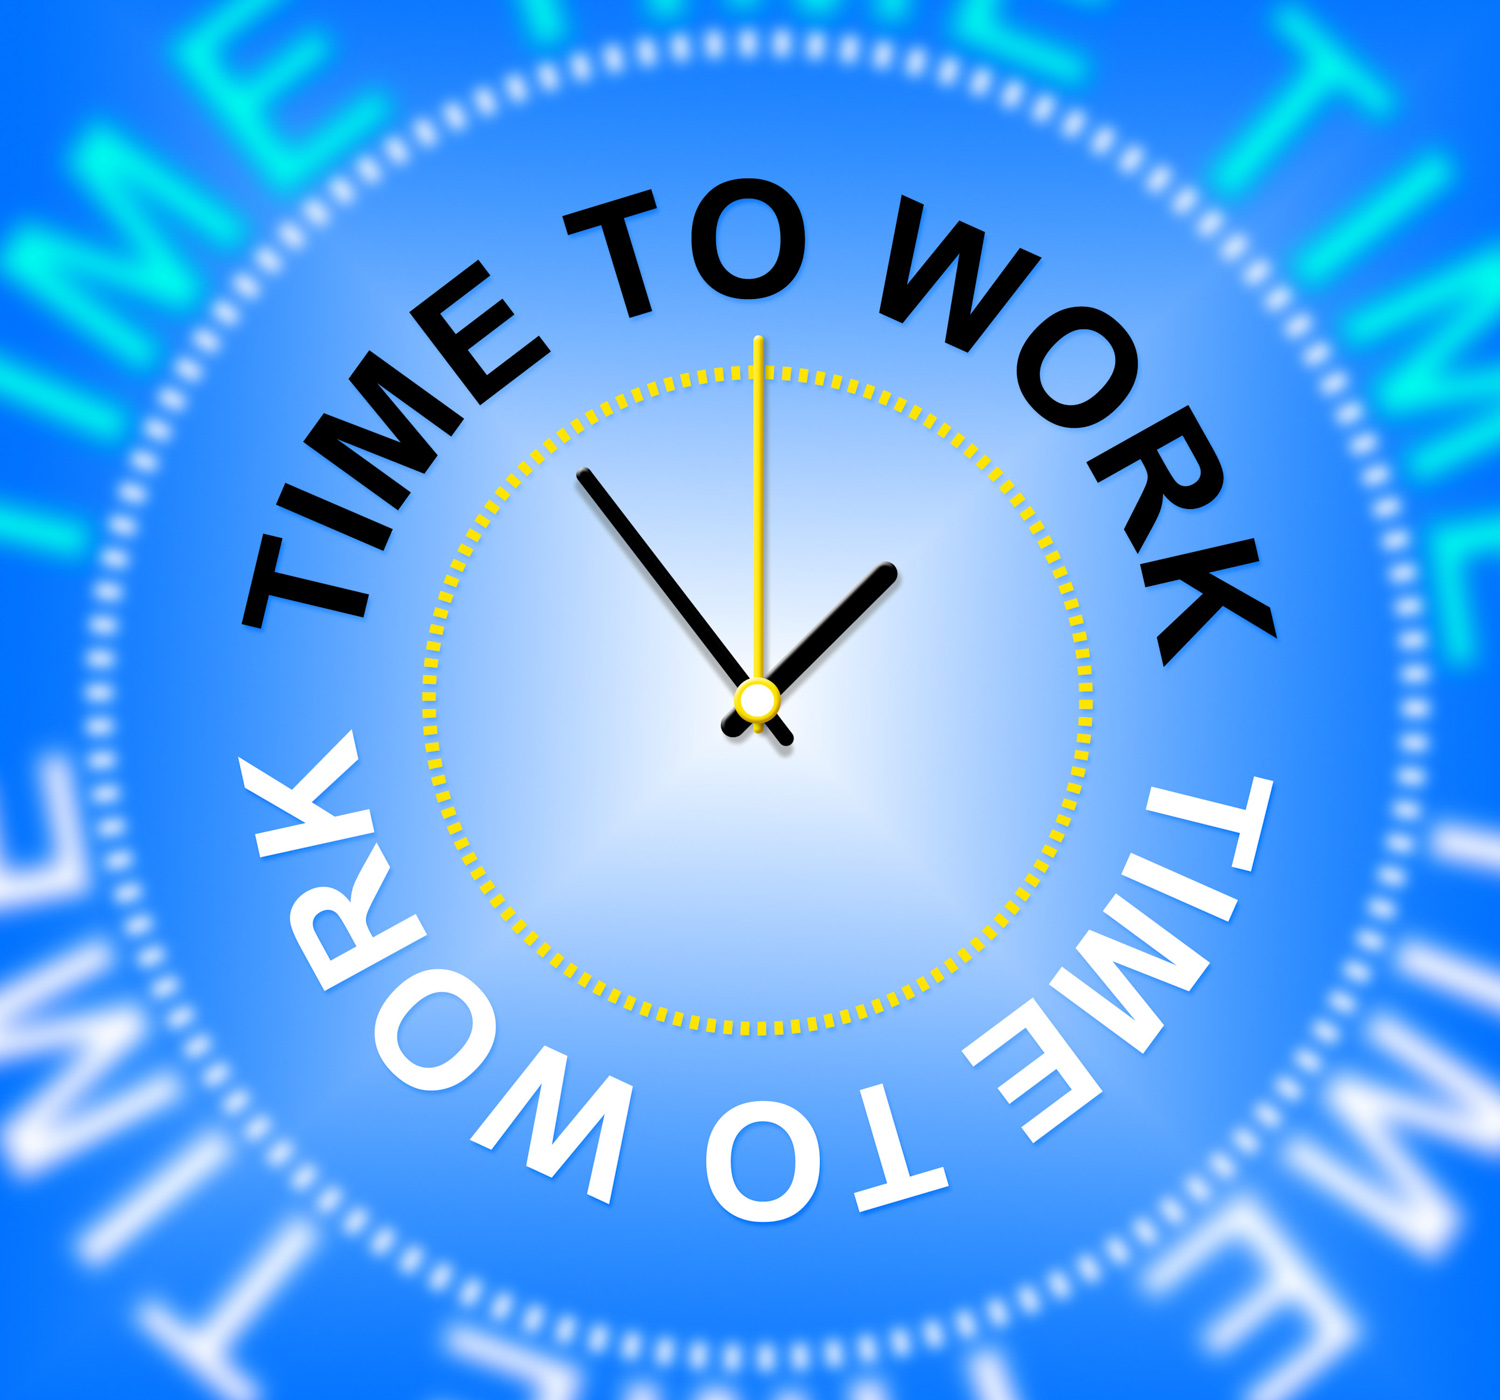 Time to work represents hiring hire and worked photo